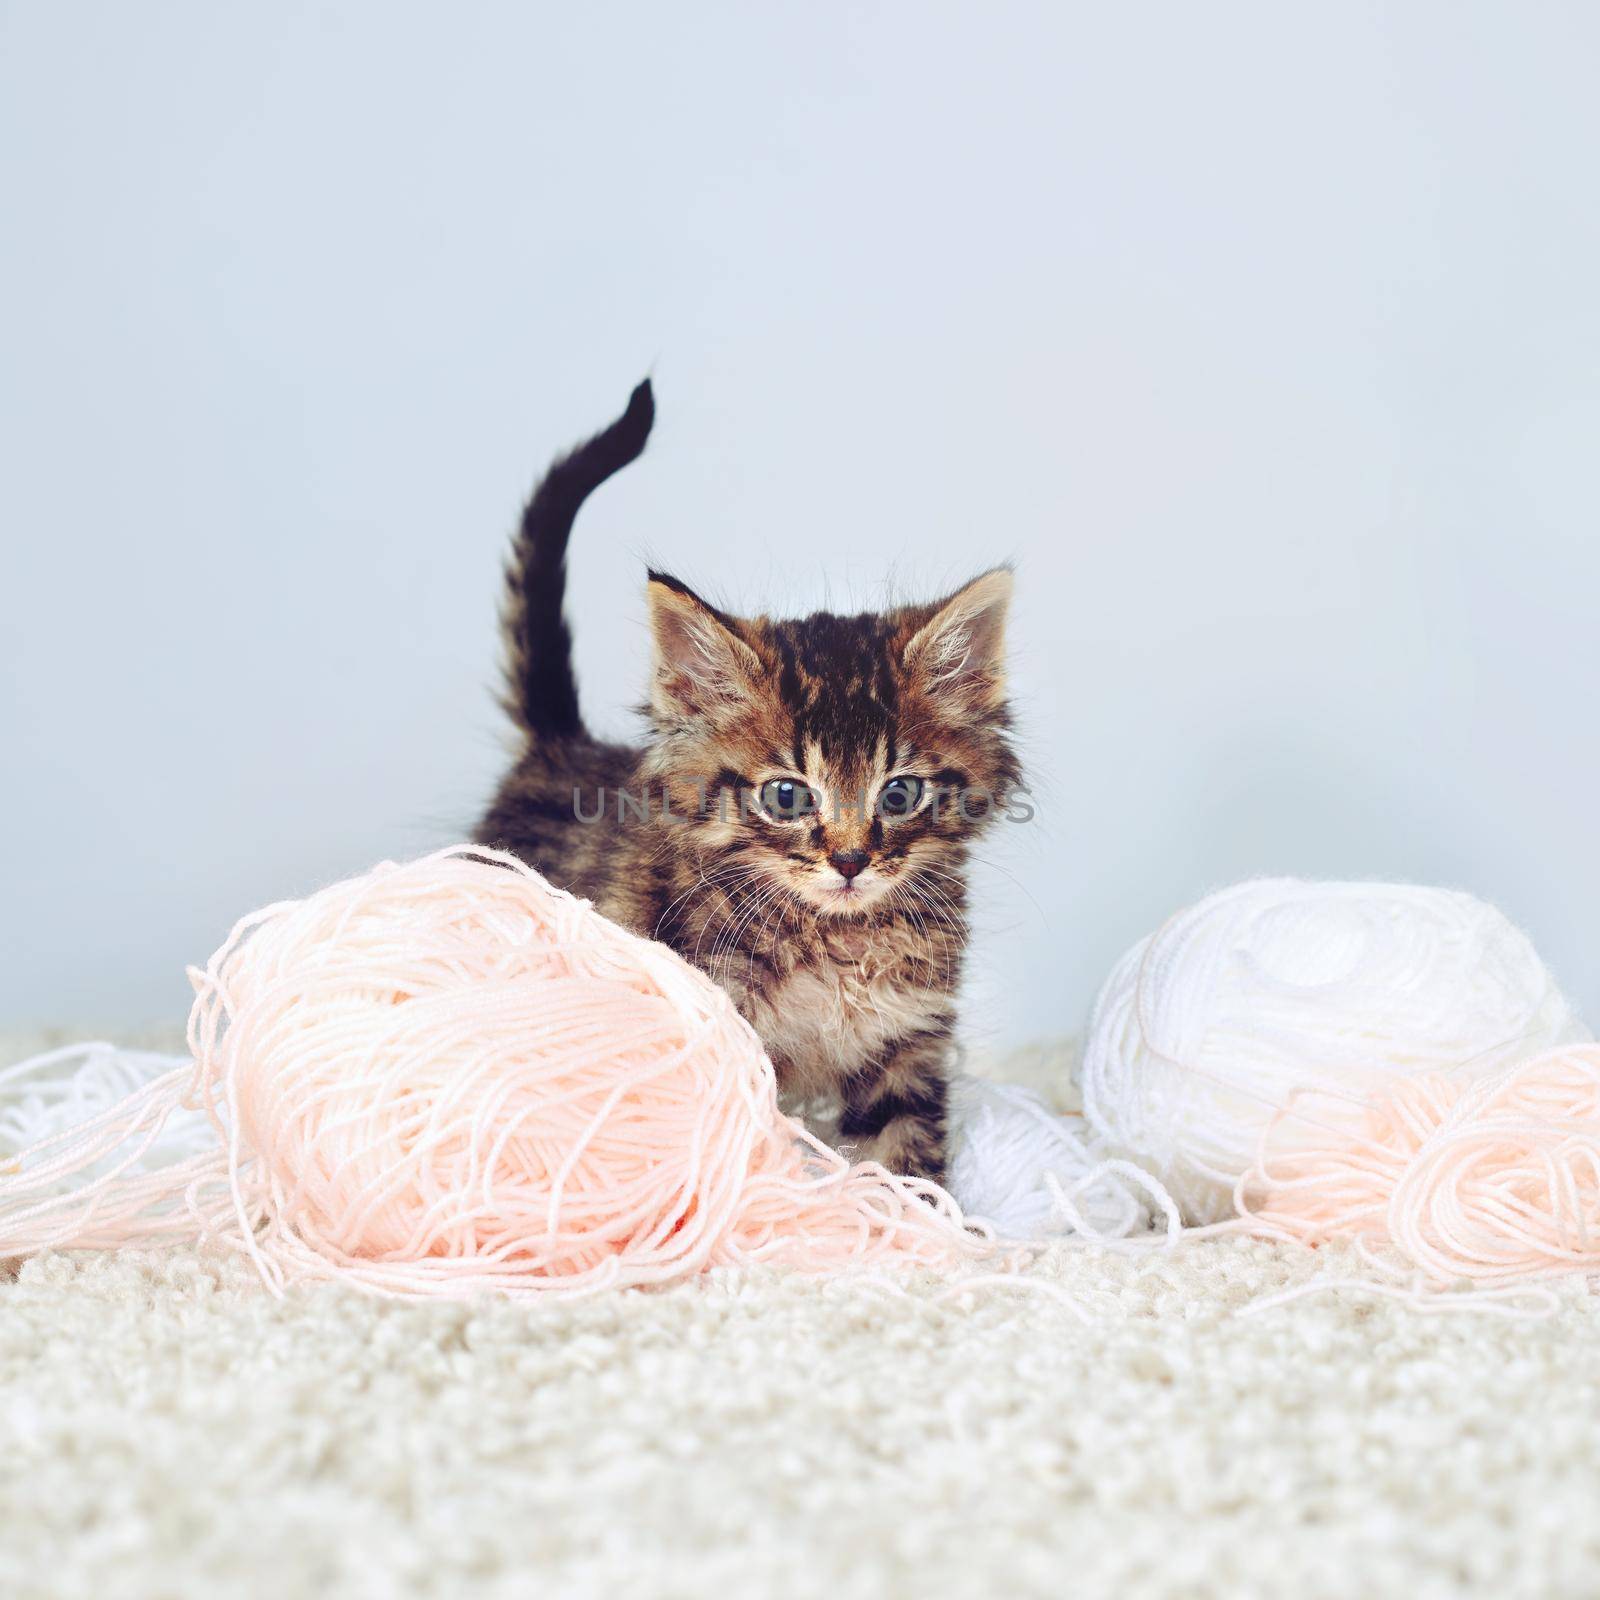 Studio shot of an adorable tabby kitten playing with a ball of wall.